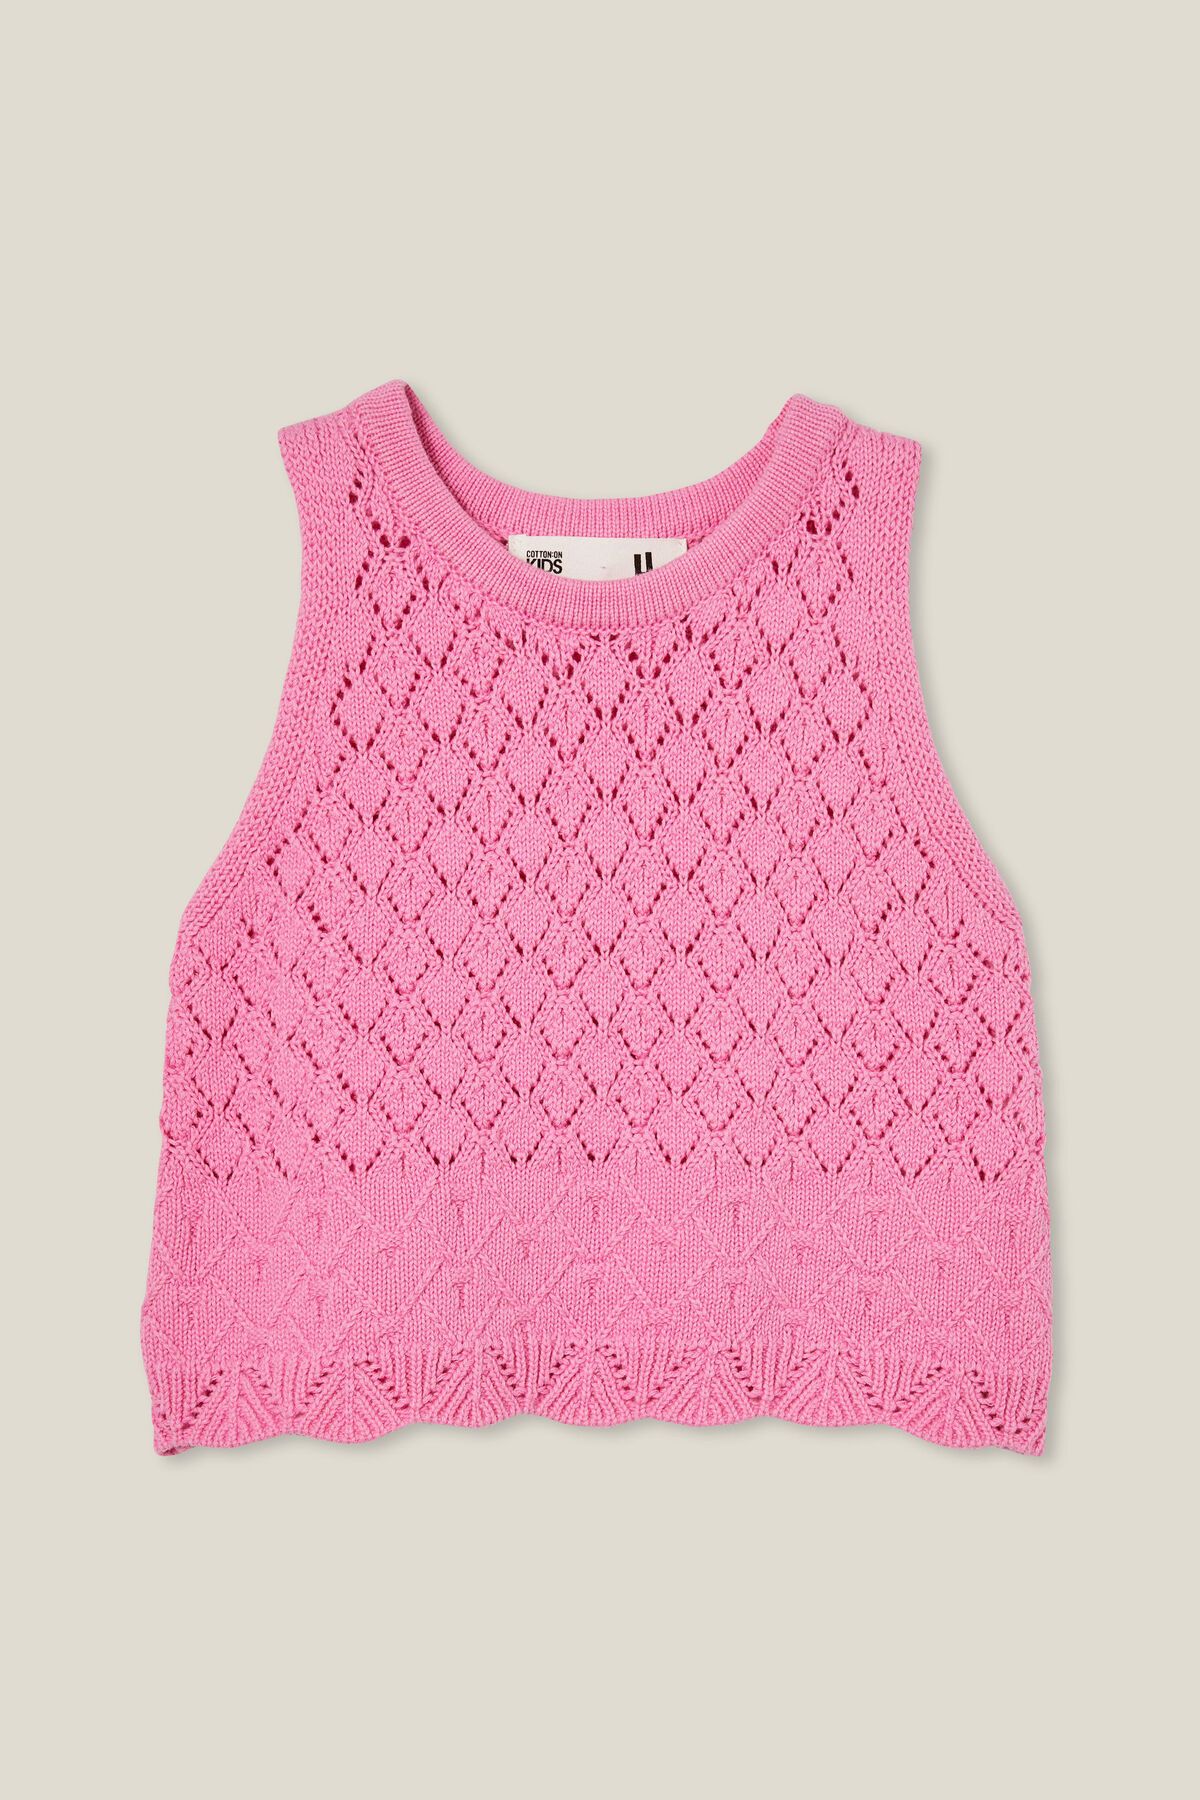 Taylor Crochet Top | Cotton On (US)